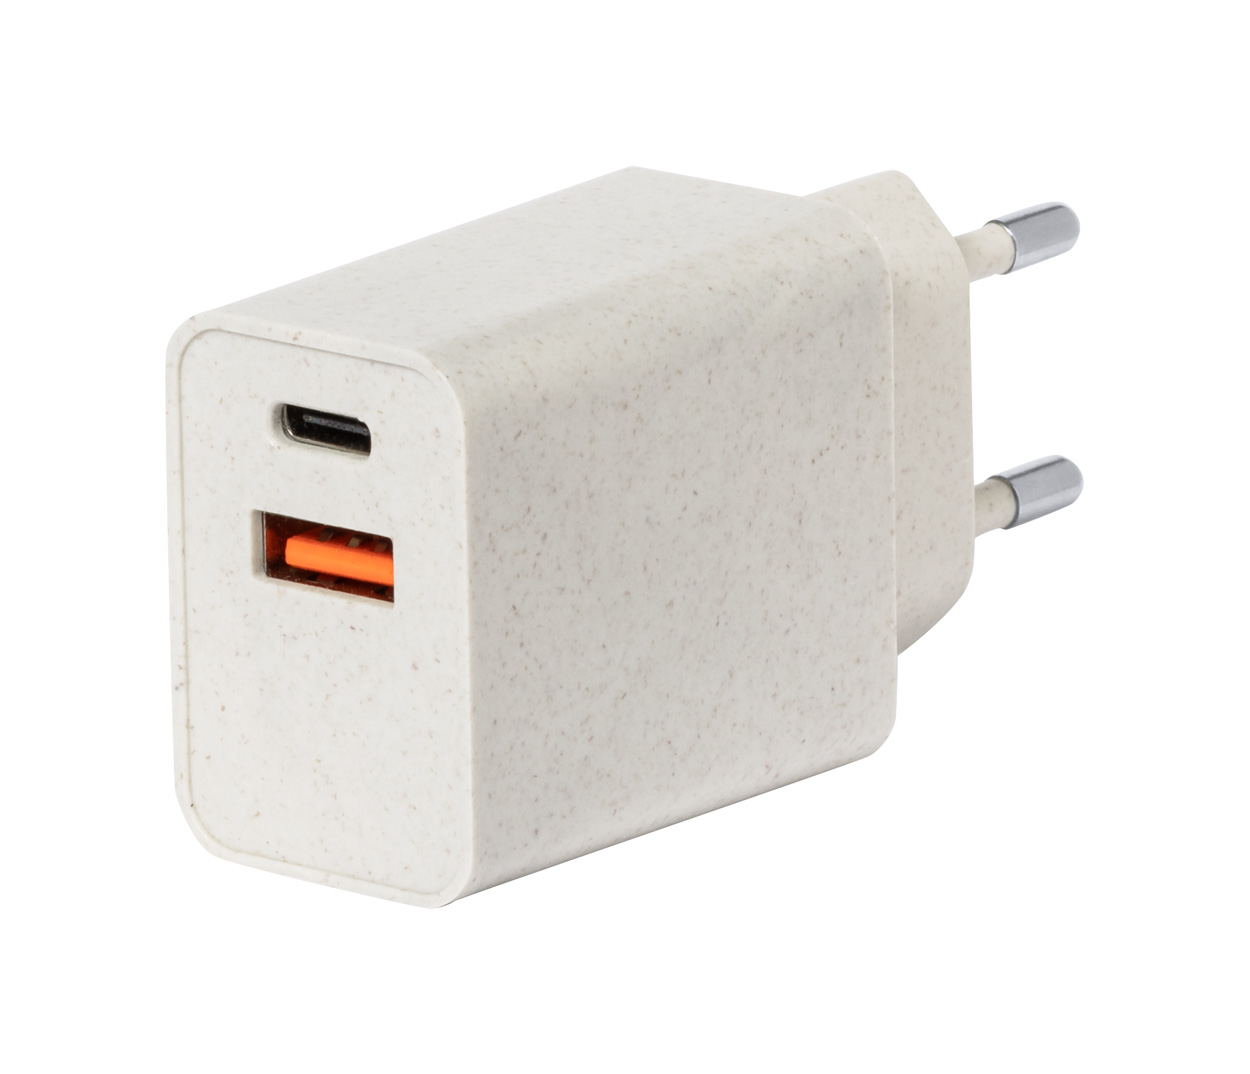 Promo Avery USB wall charger